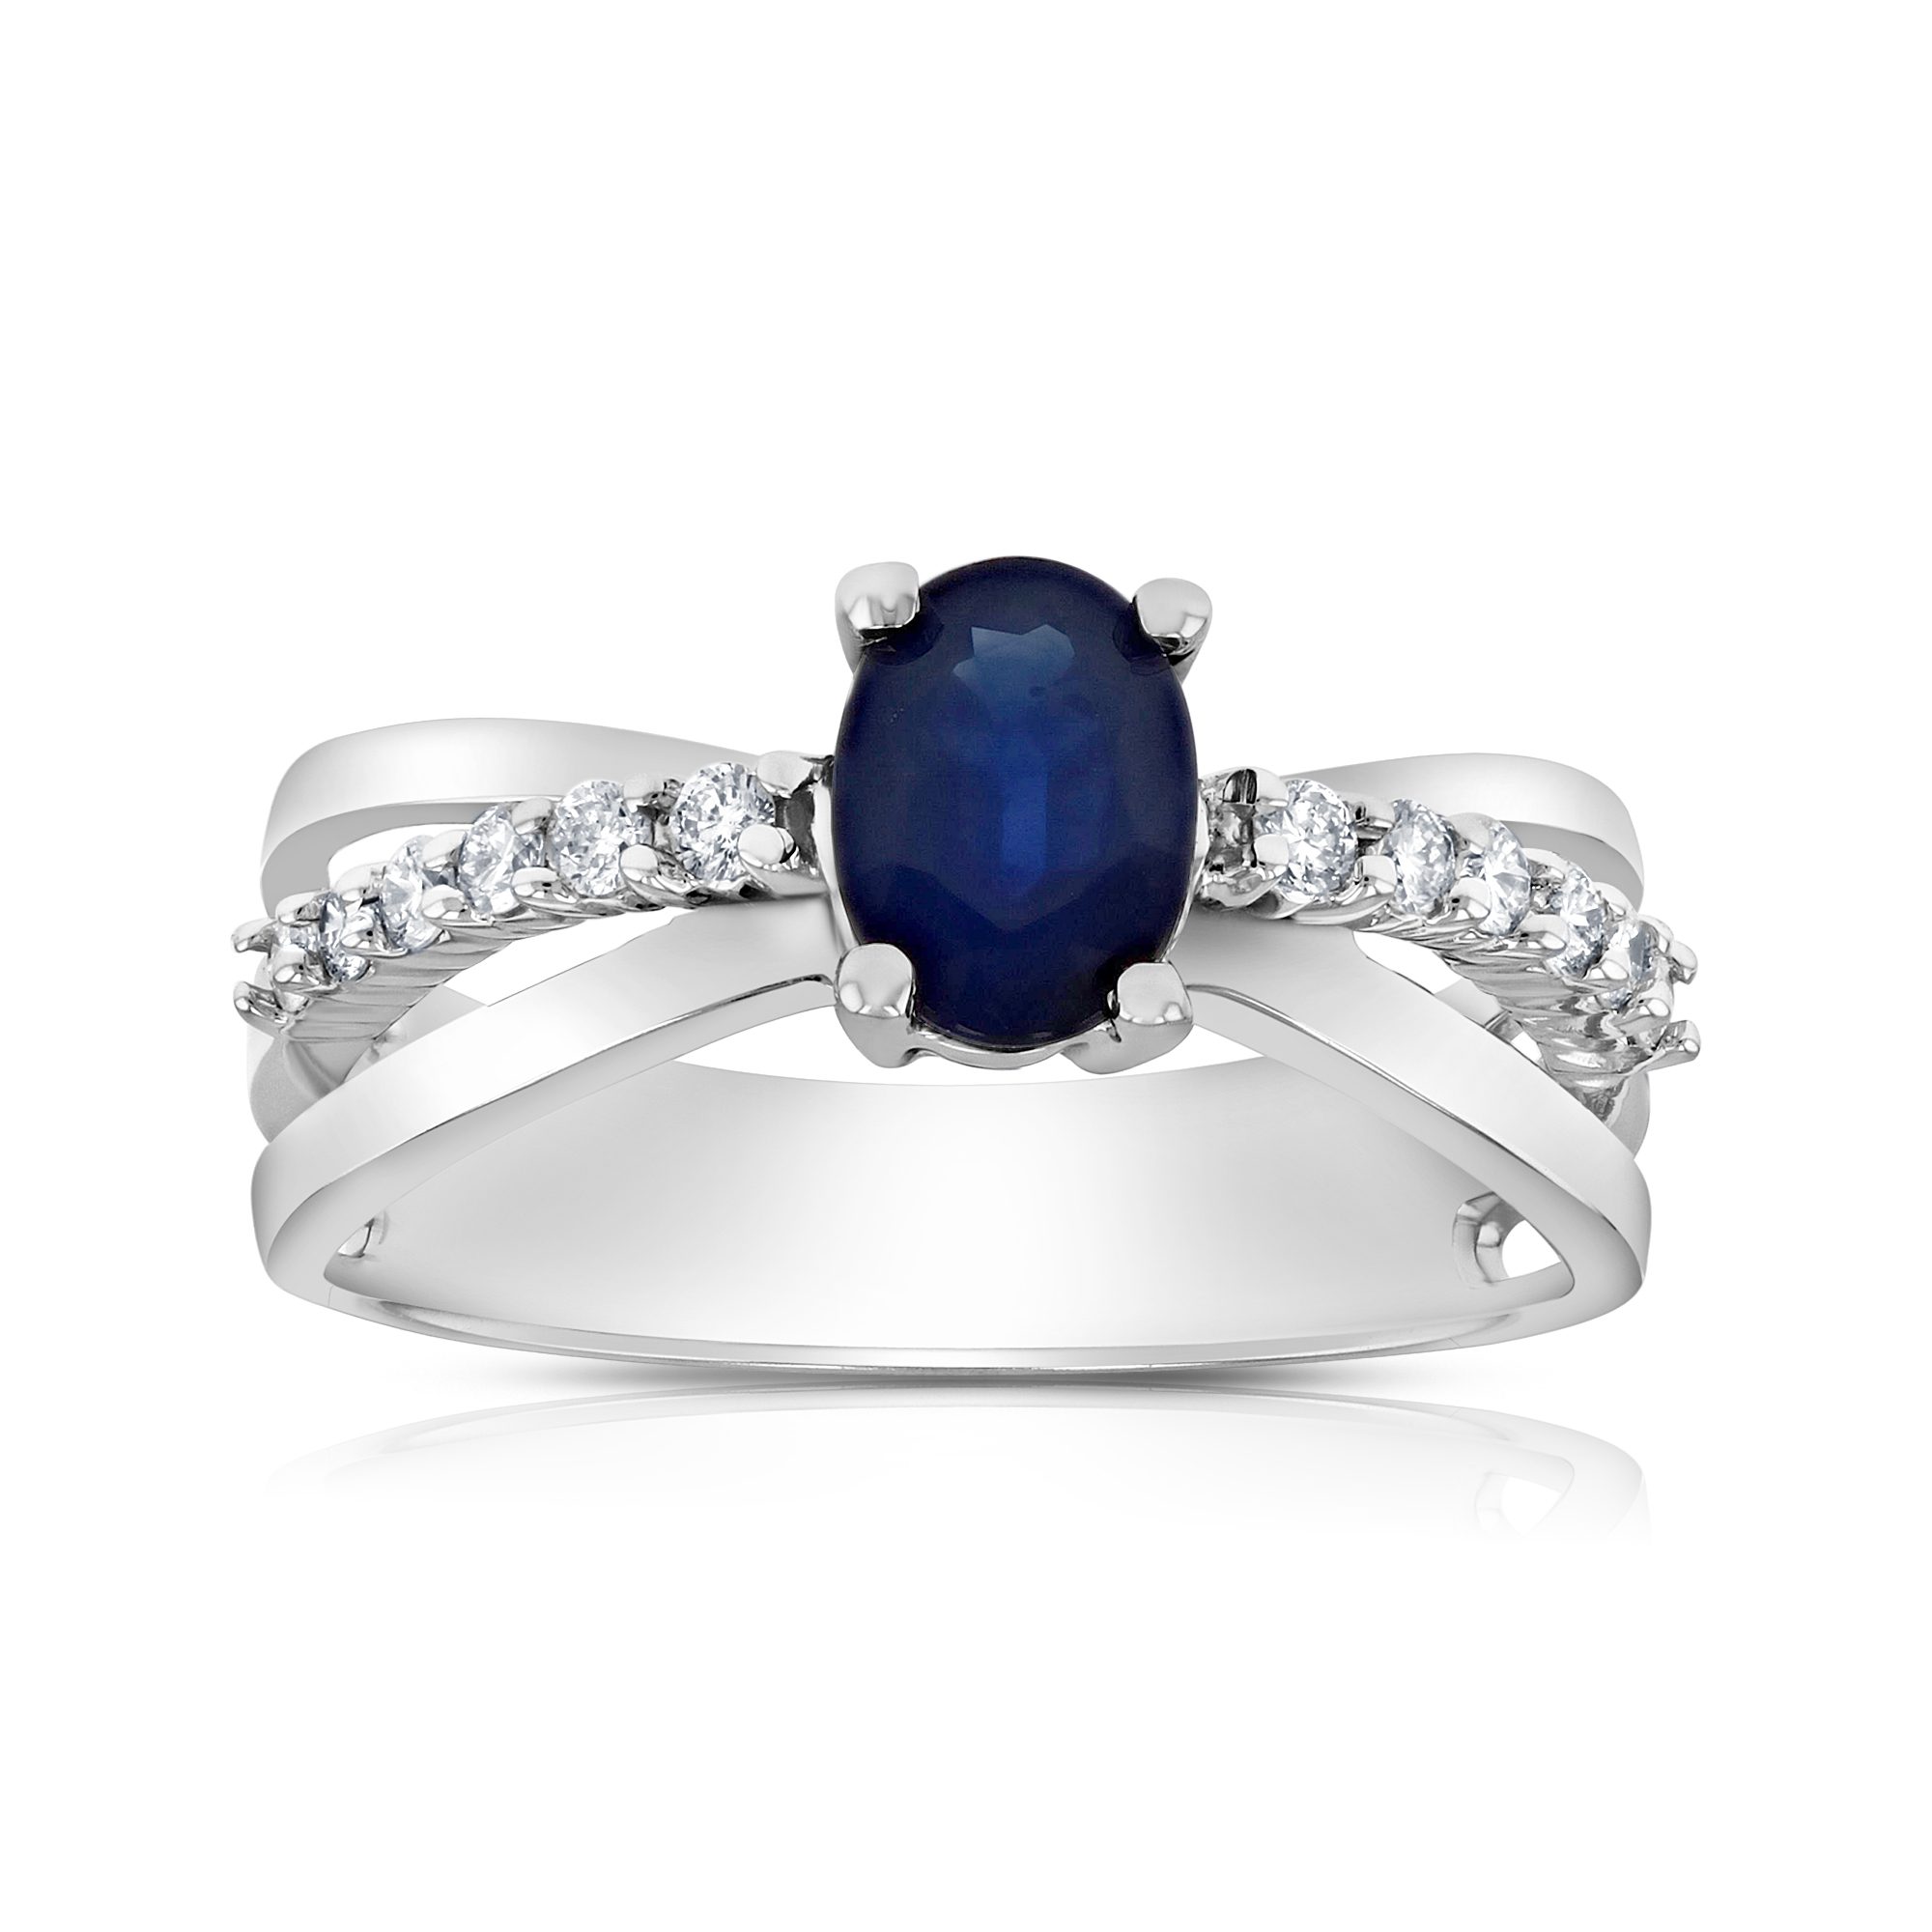 View 0.20ctw Diamond and Sapphire Ring in 14k Gold